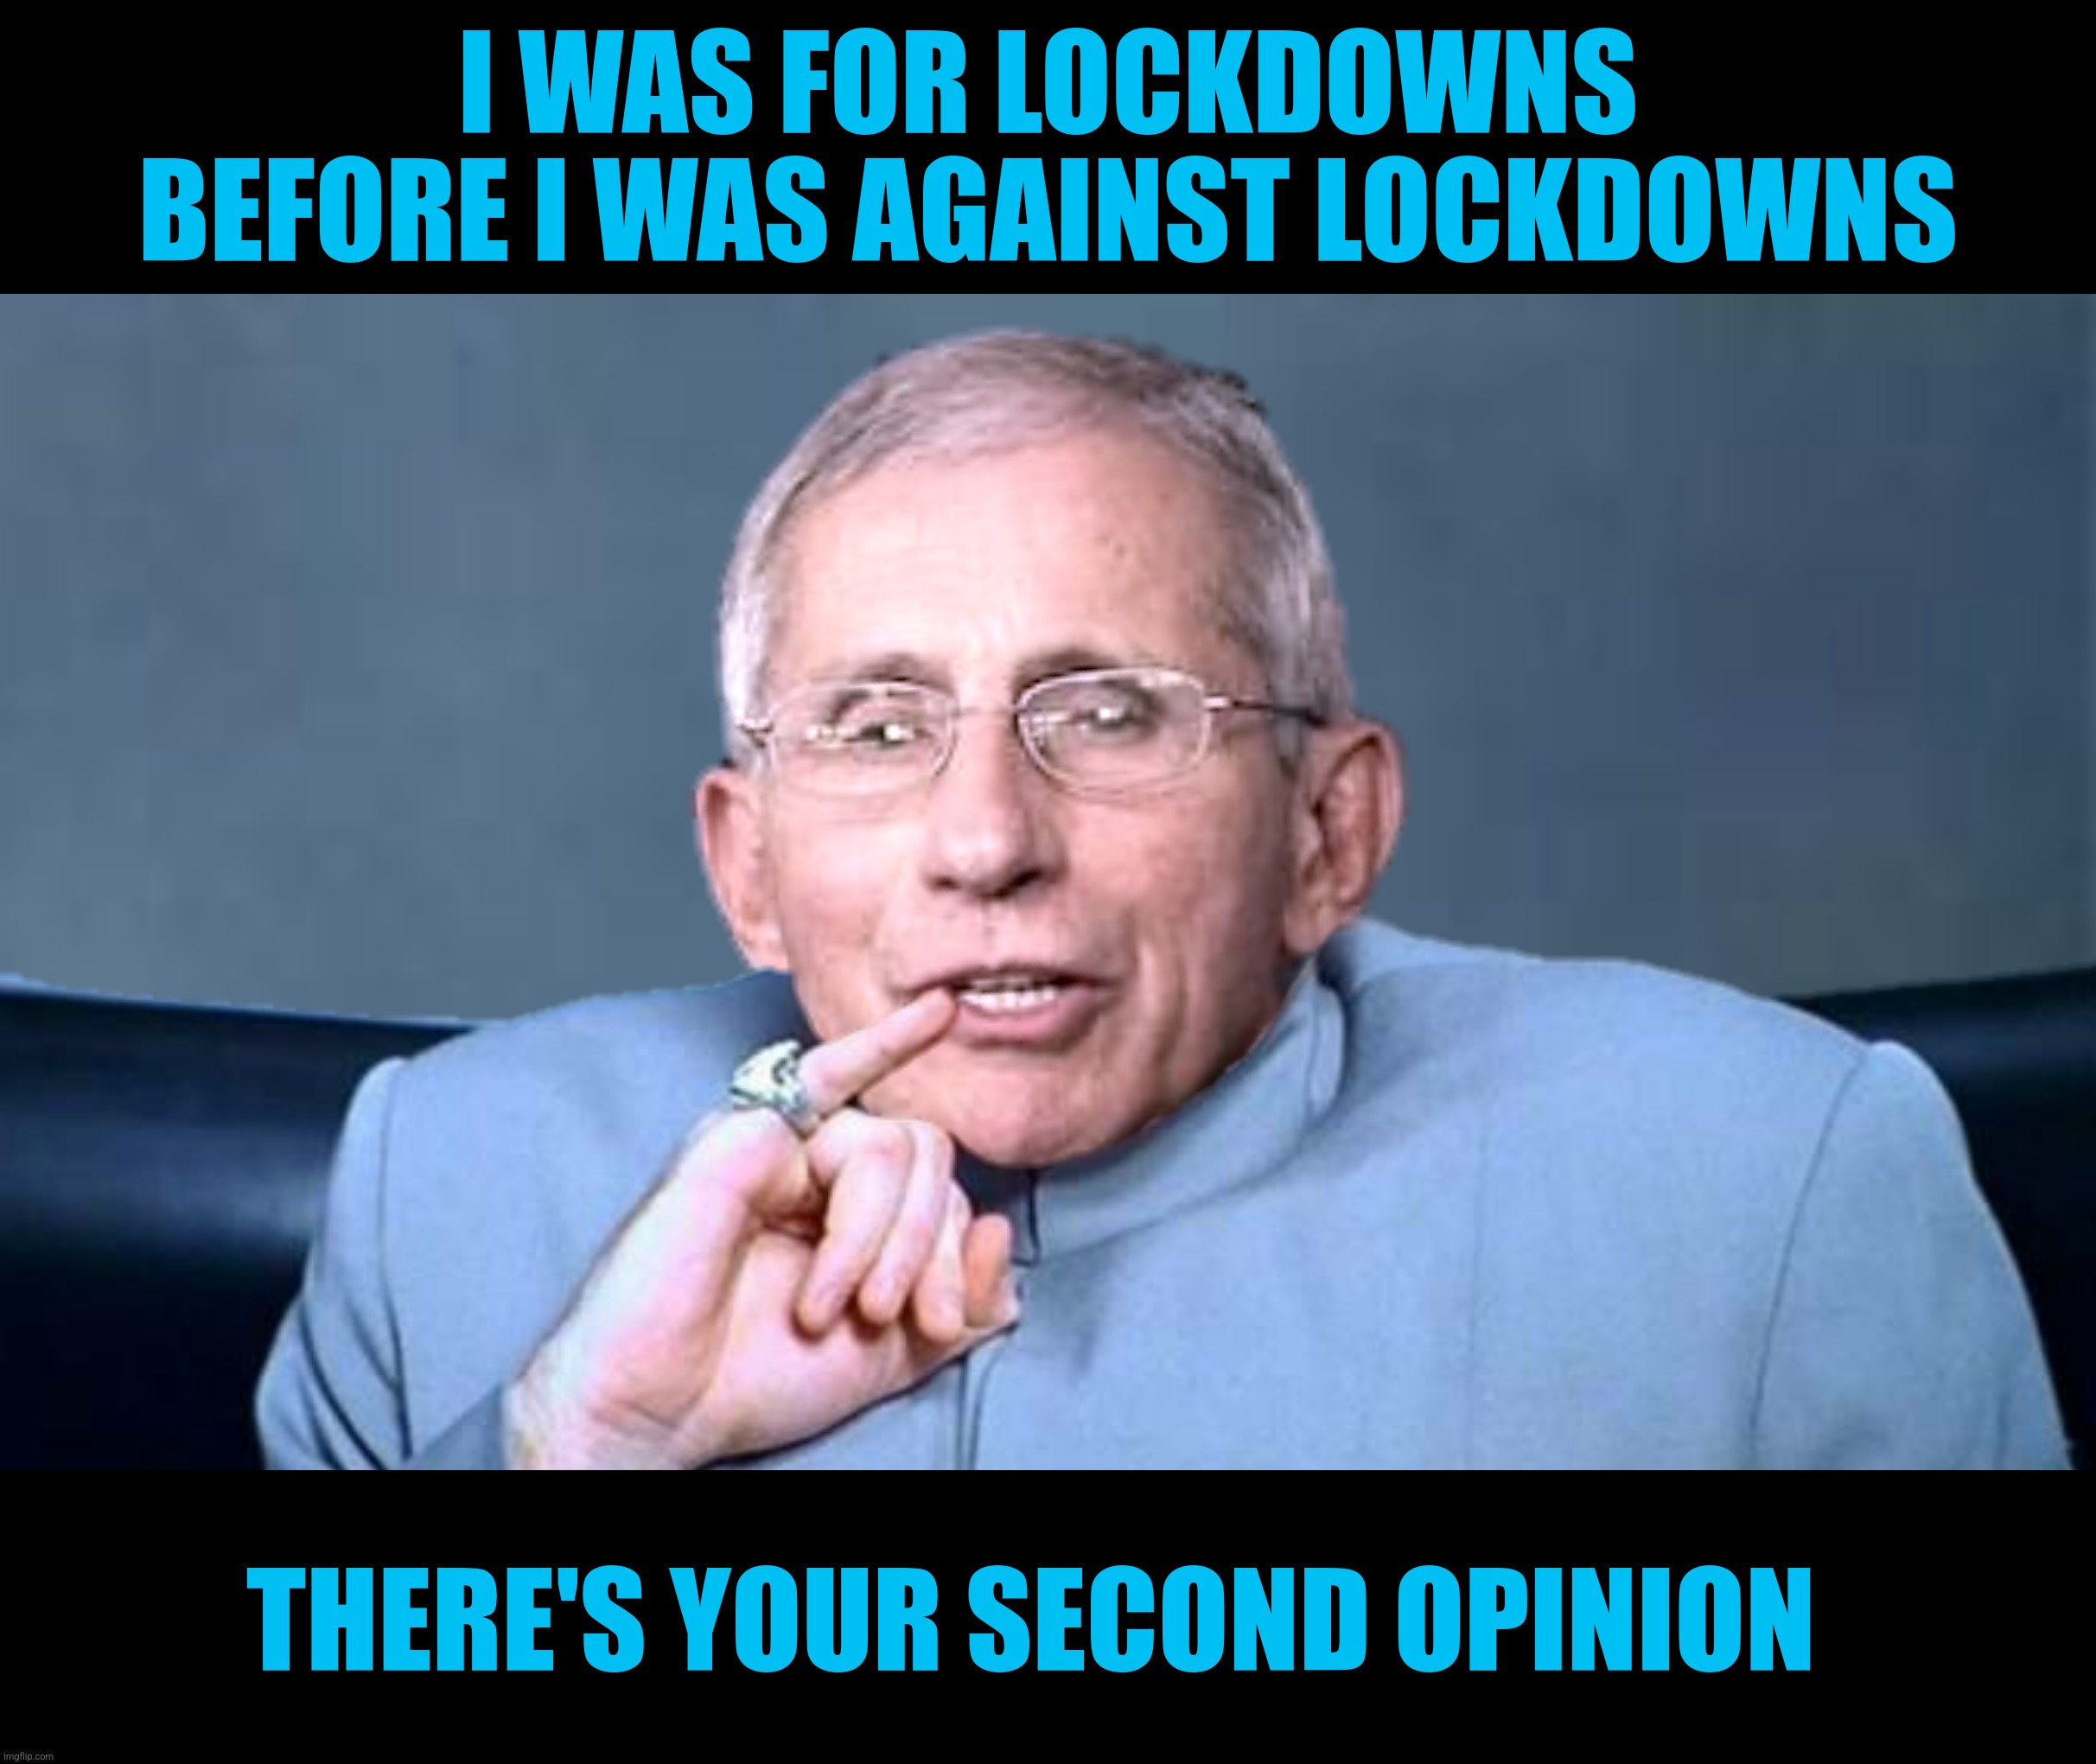 I WAS FOR LOCKDOWNS BEFORE I WAS AGAINST LOCKDOWNS THERE'S YOUR SECOND OPINION | made w/ Imgflip meme maker